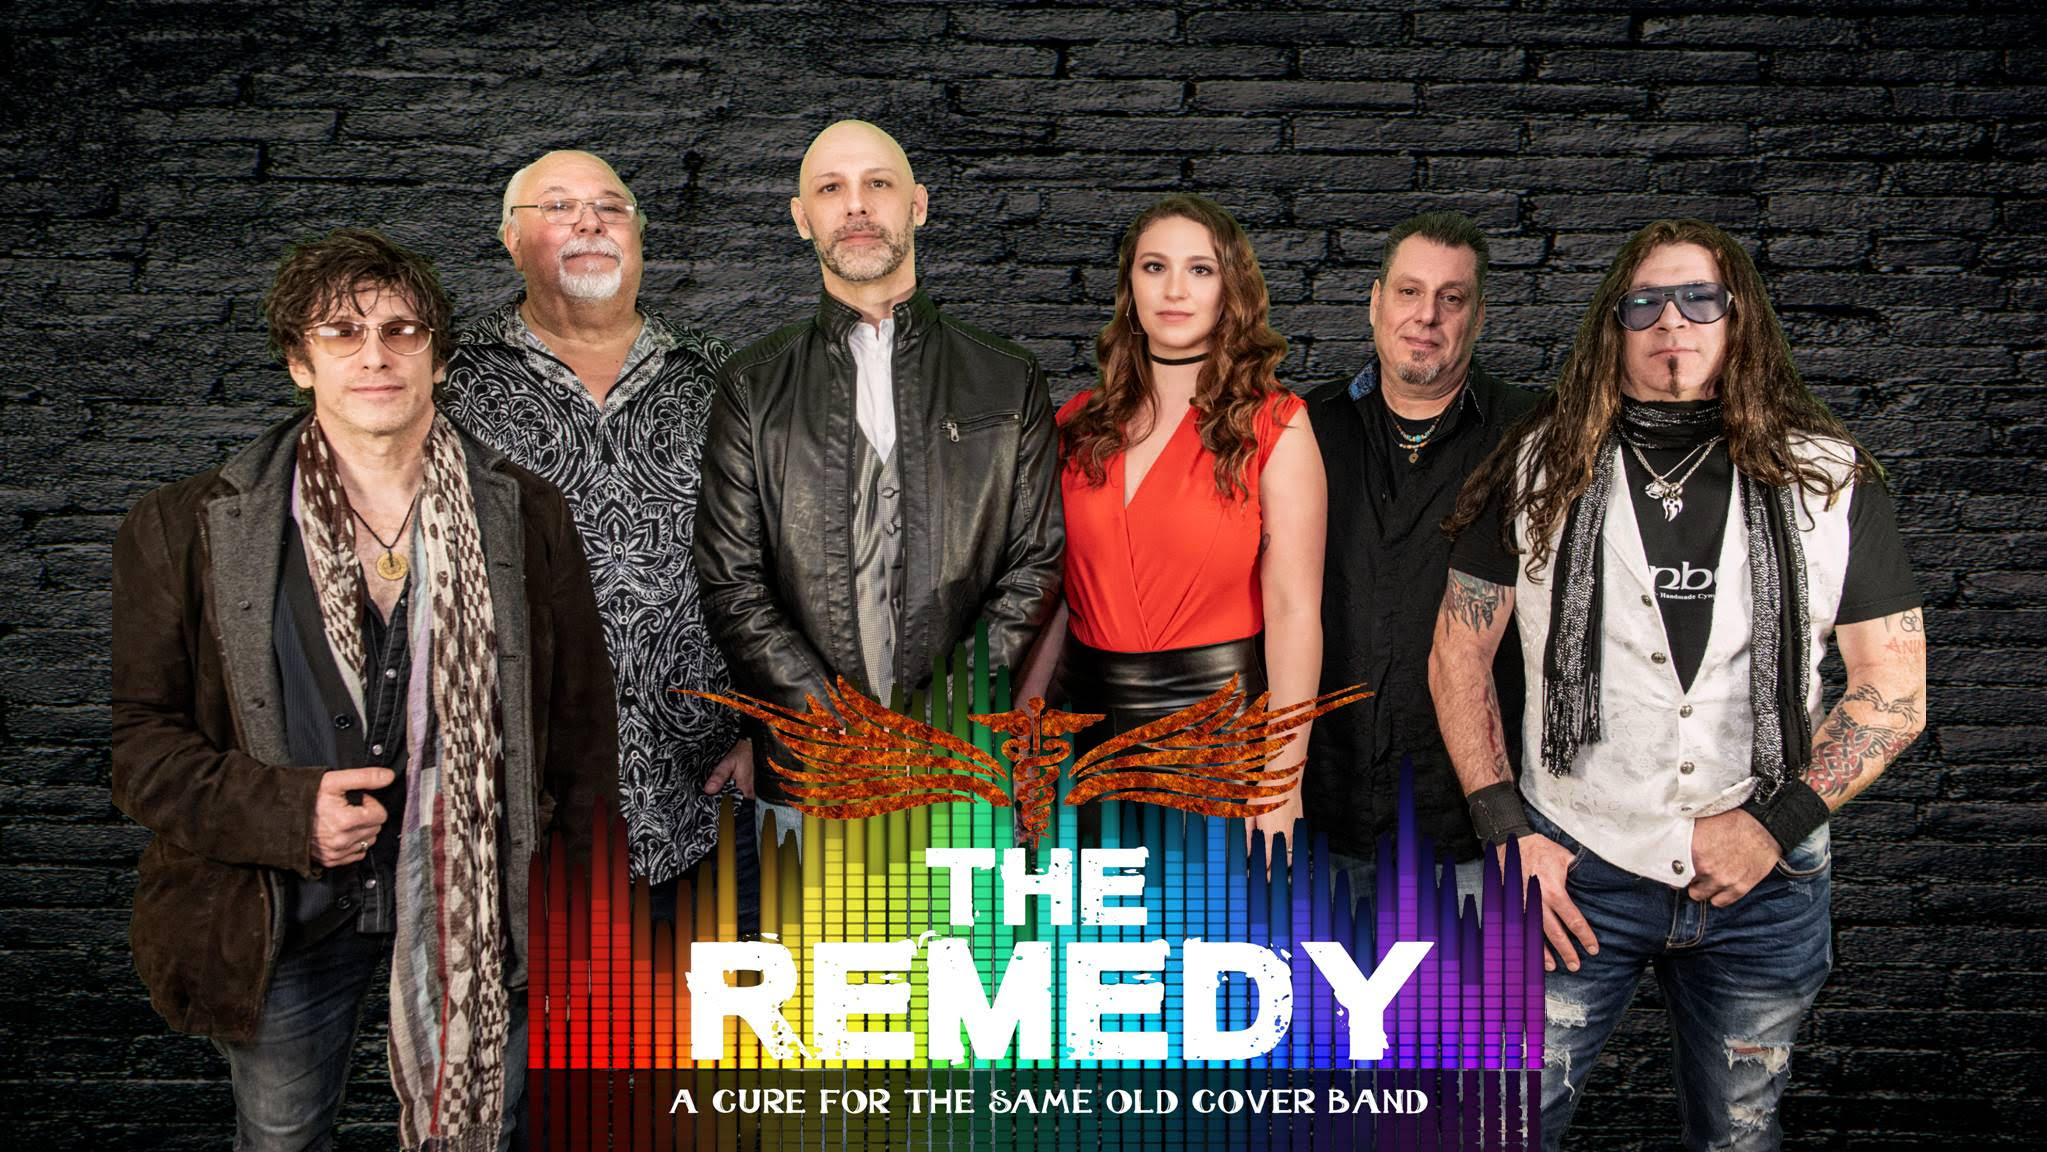 A color photo of the six members of the band Remedy.